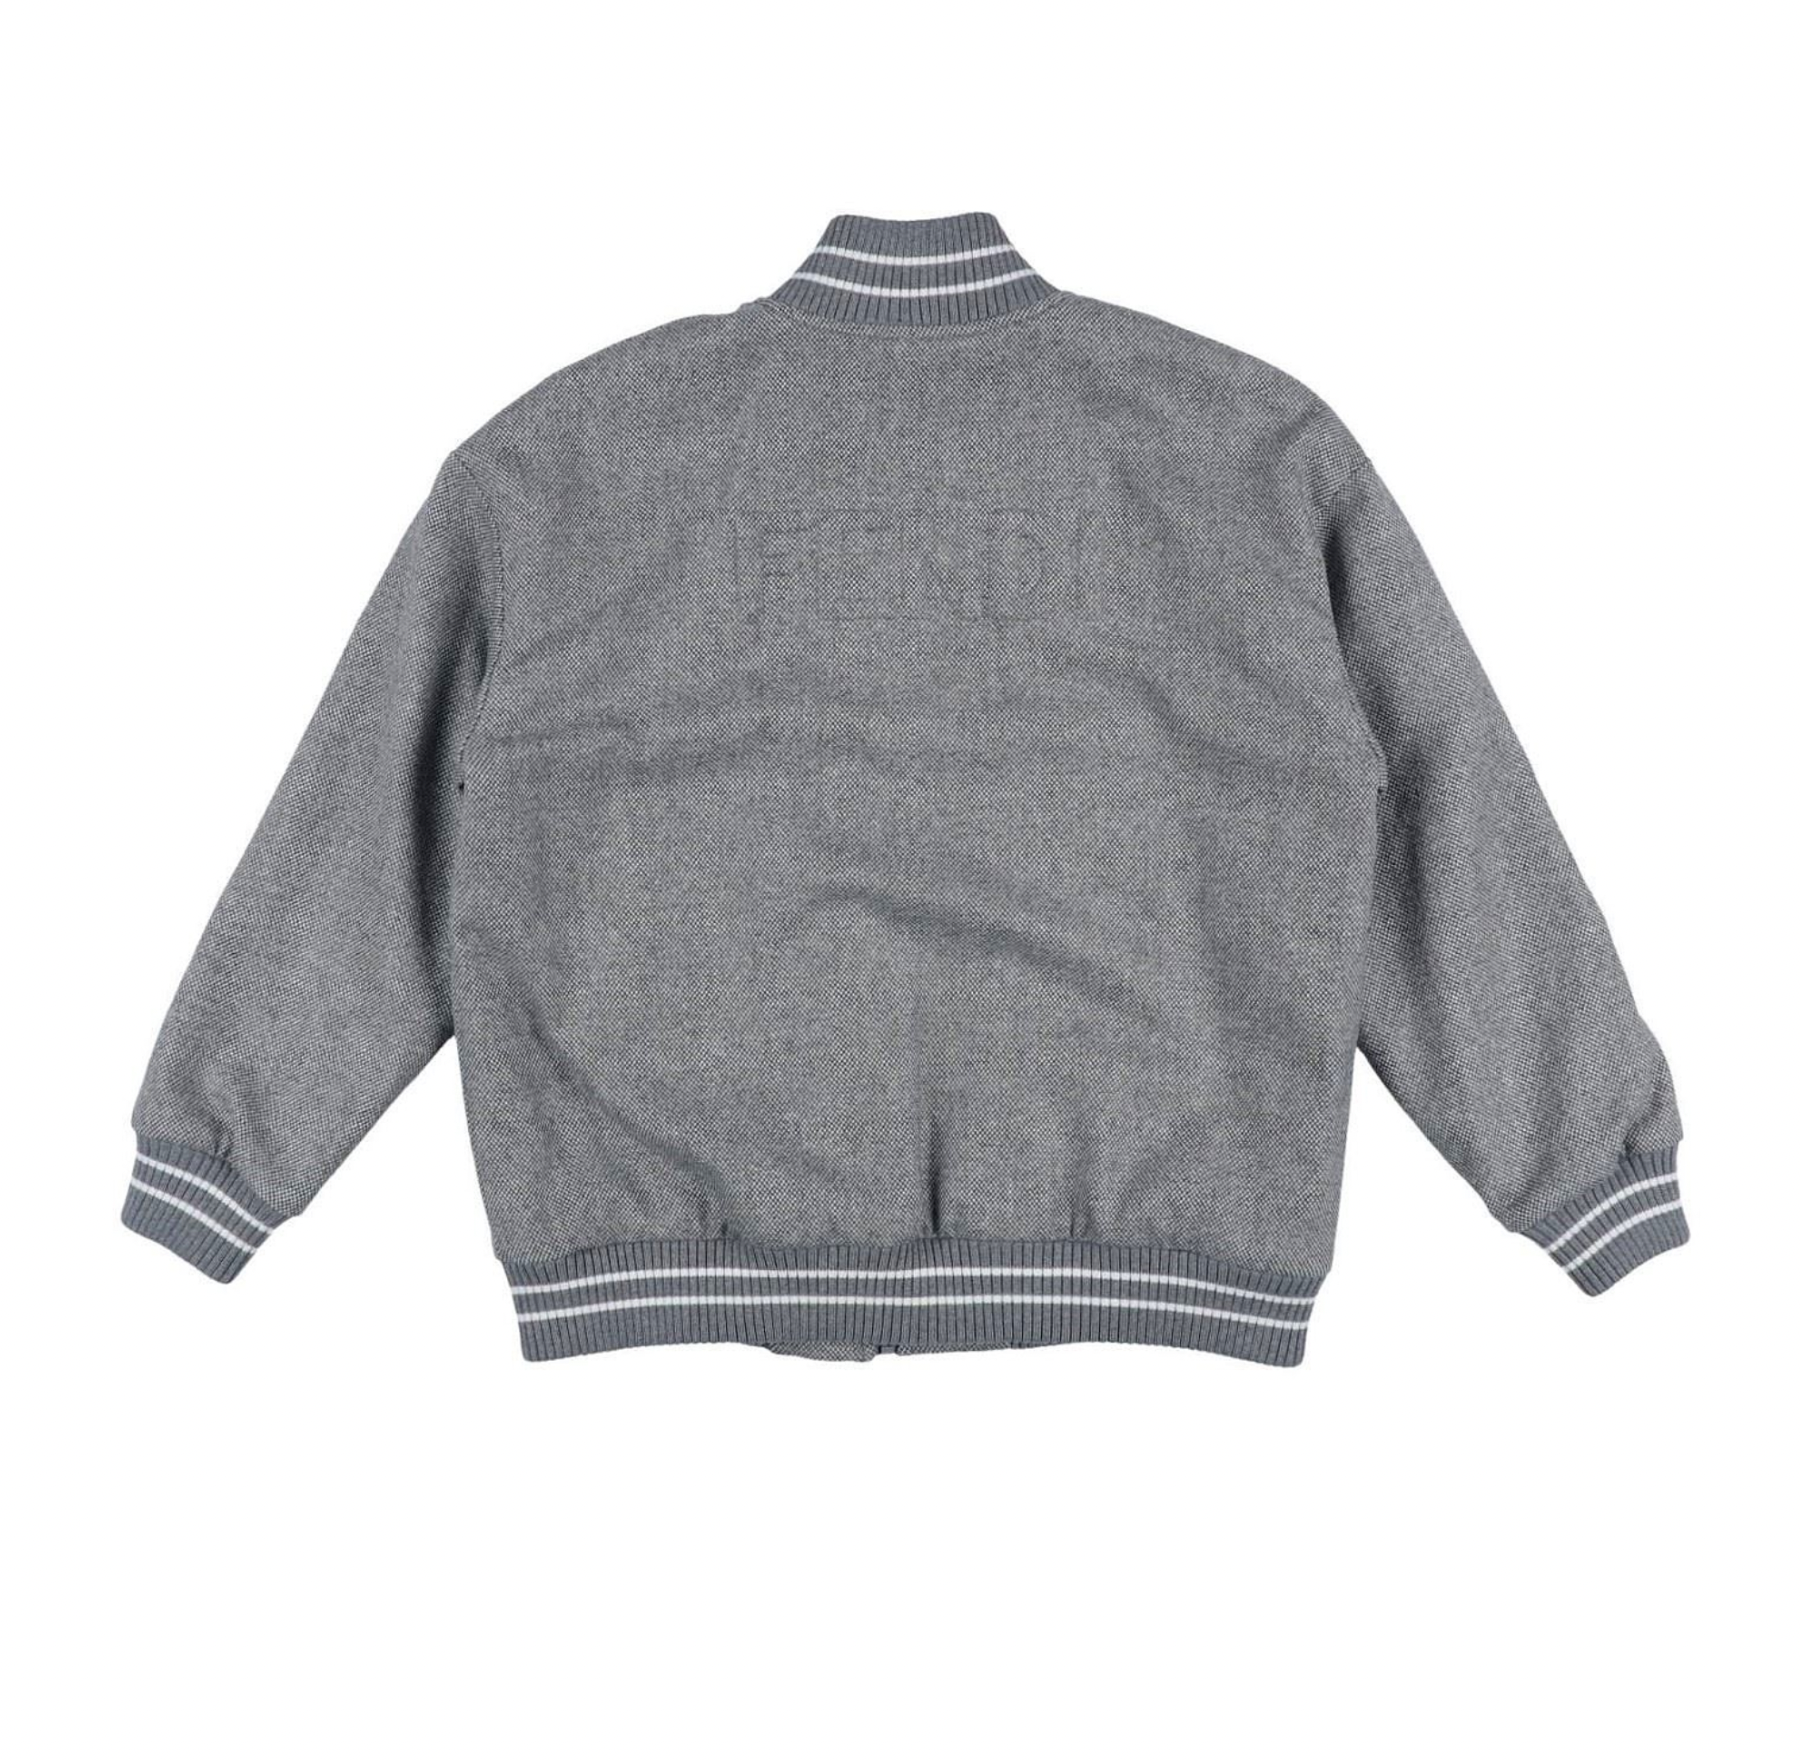 FENDI - Gray wool &amp; cashmere bombers - 3 years old